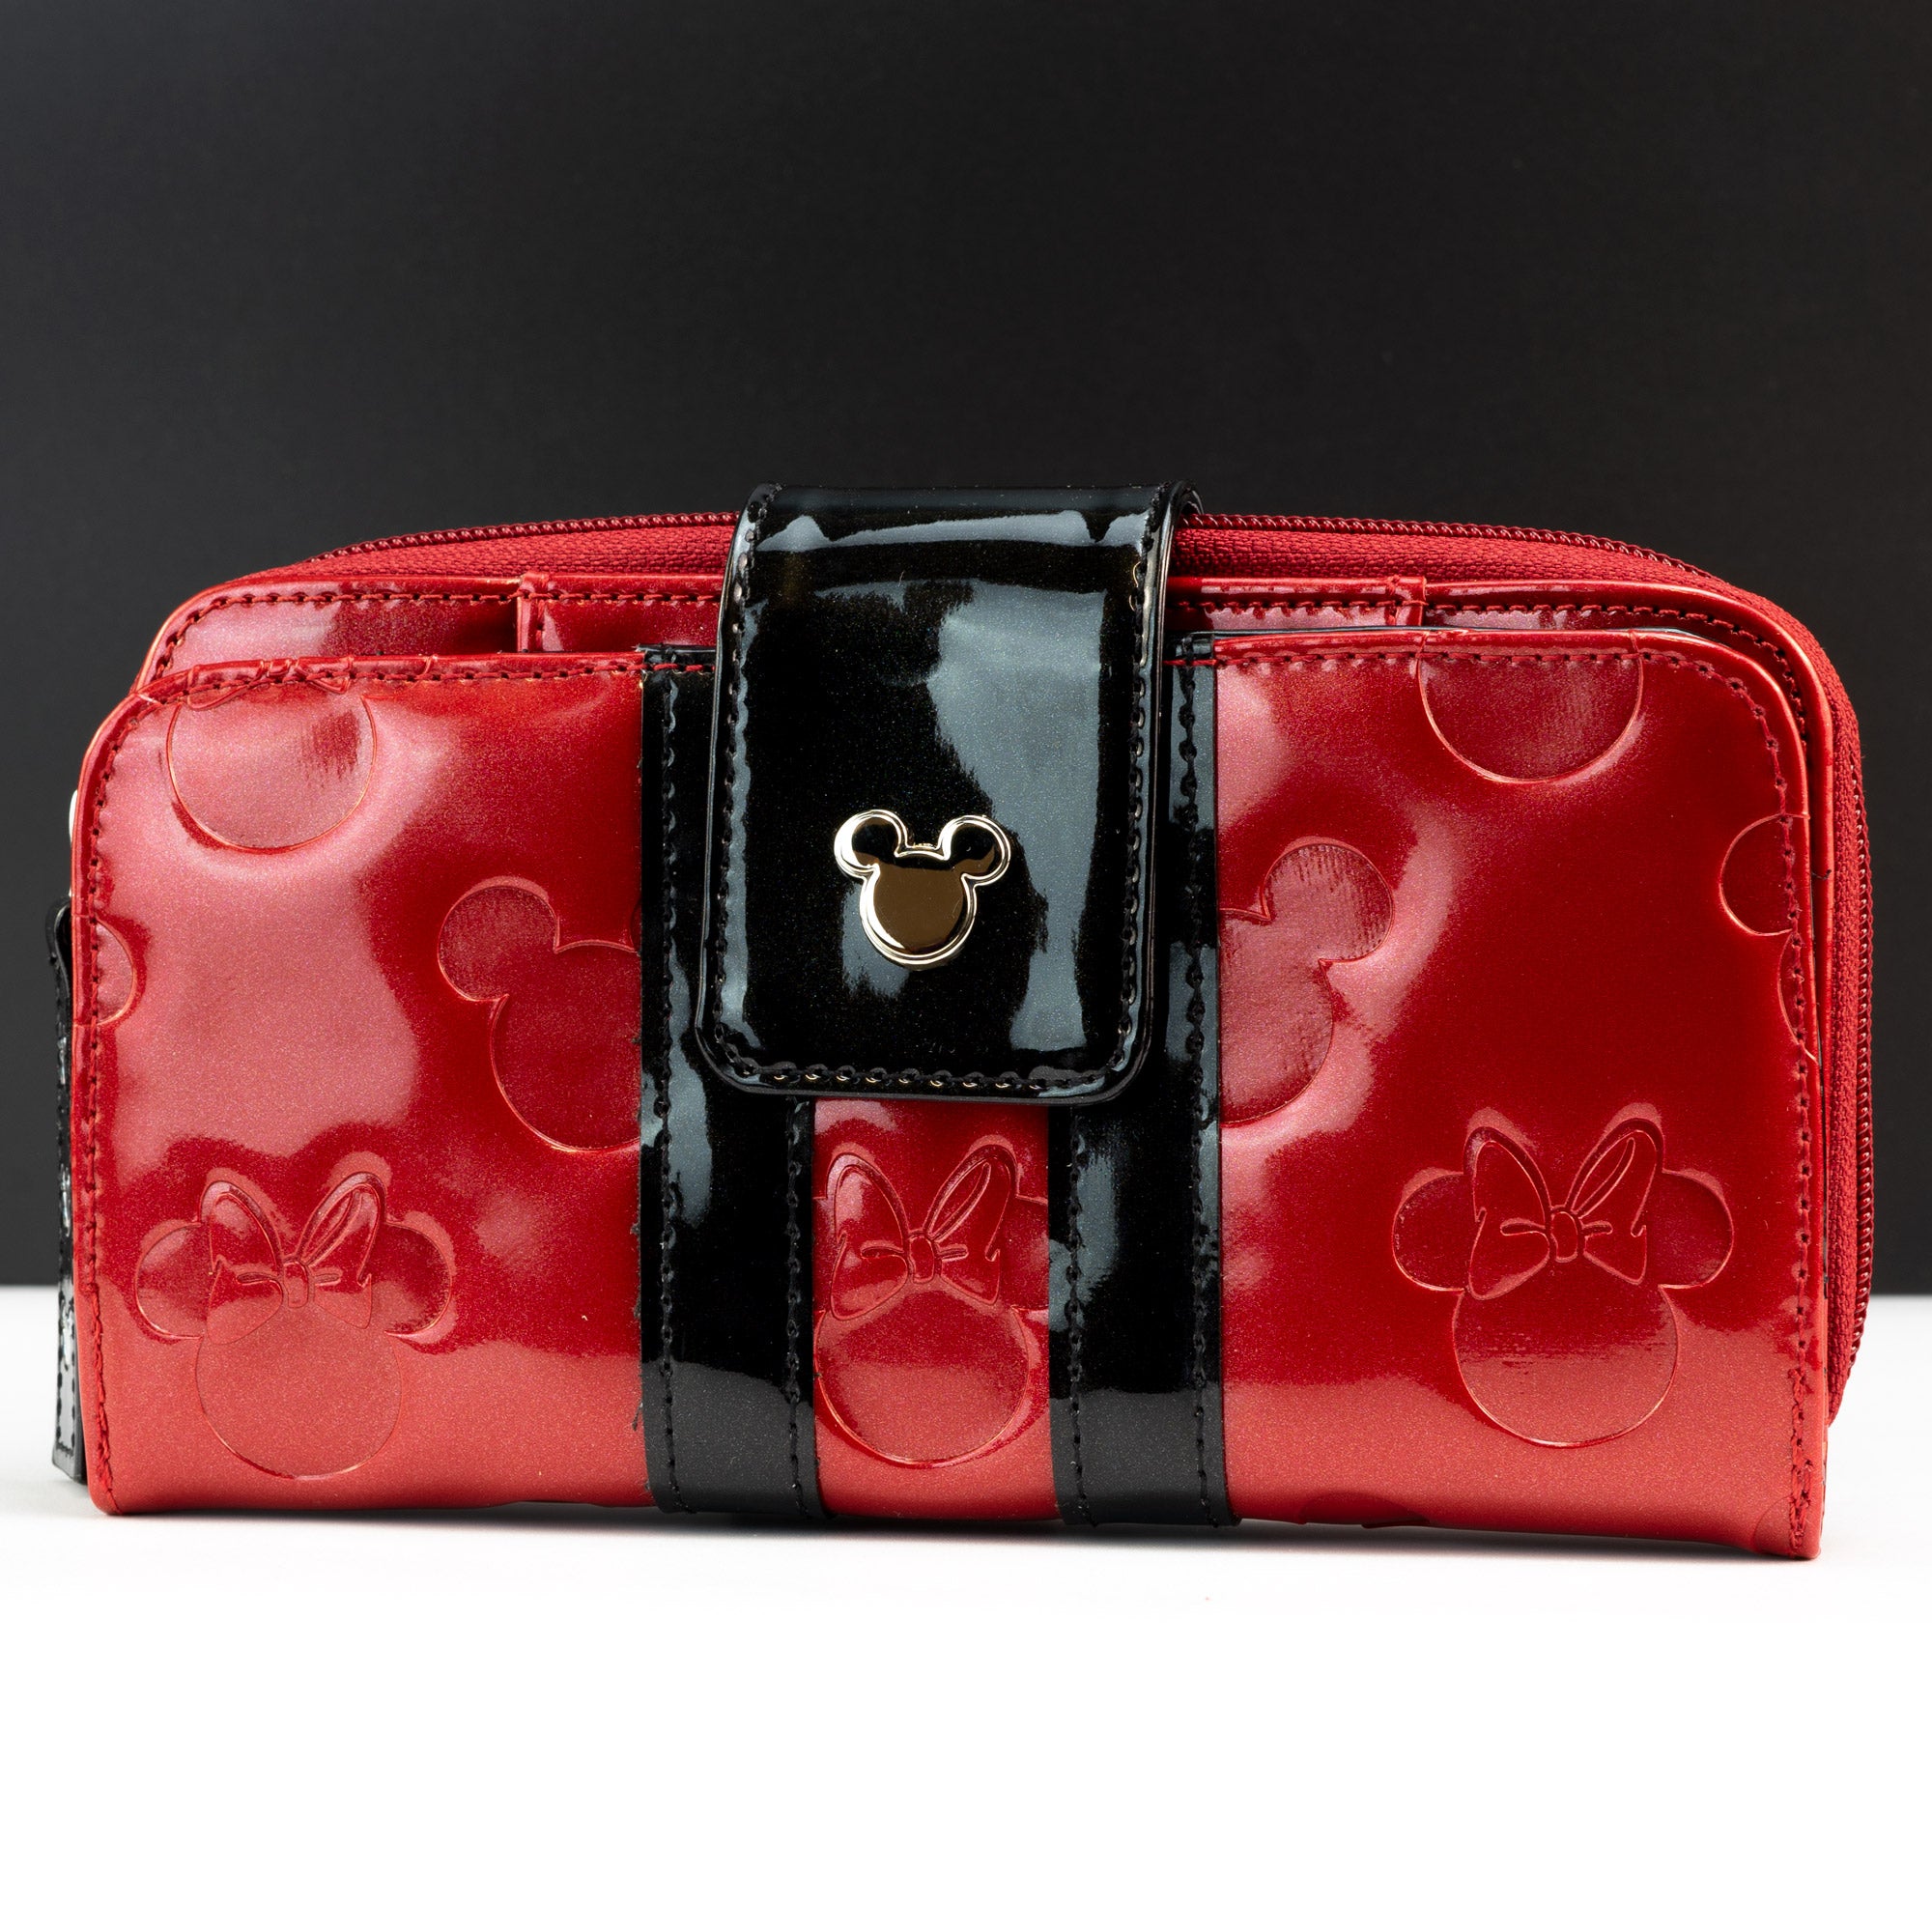 Loungefly x Disney Mickey and Minnie Mouse Red Silhouettes Wallet